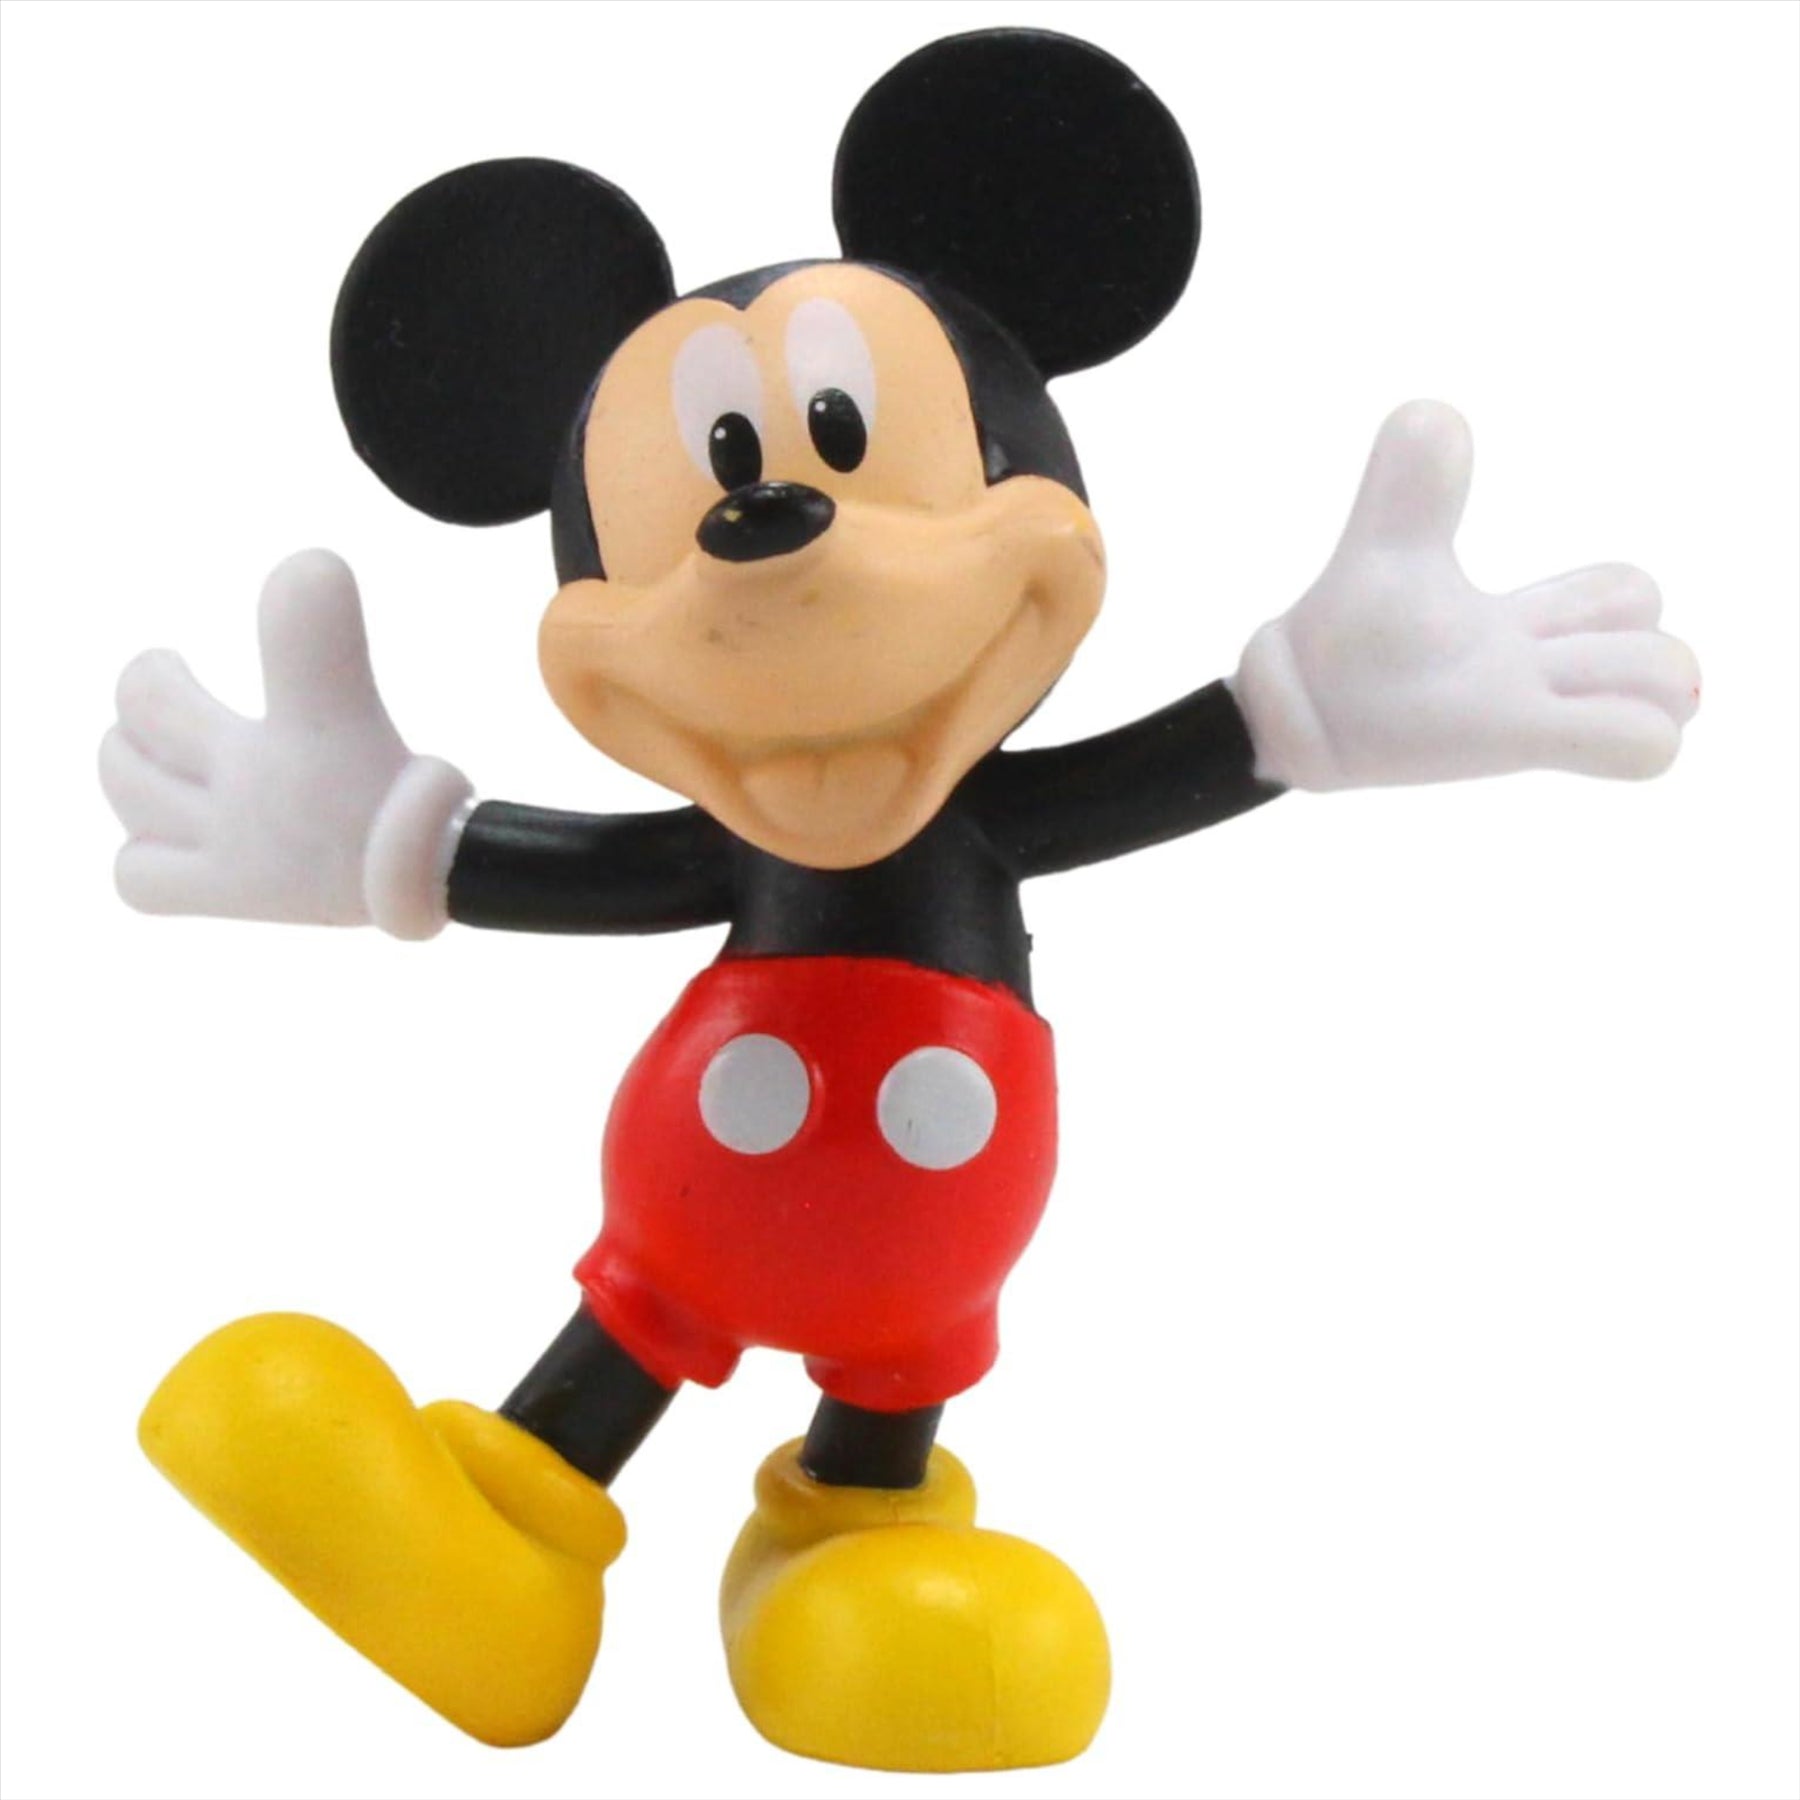 Mickey and Friends 5 Pack 2.5" 6cm Figures - Highly Detailed Collectible Miniature Figures Perfect as Cake Toppers - Minnie, Mickey 2 Poses, Pluto, Donald - Toptoys2u